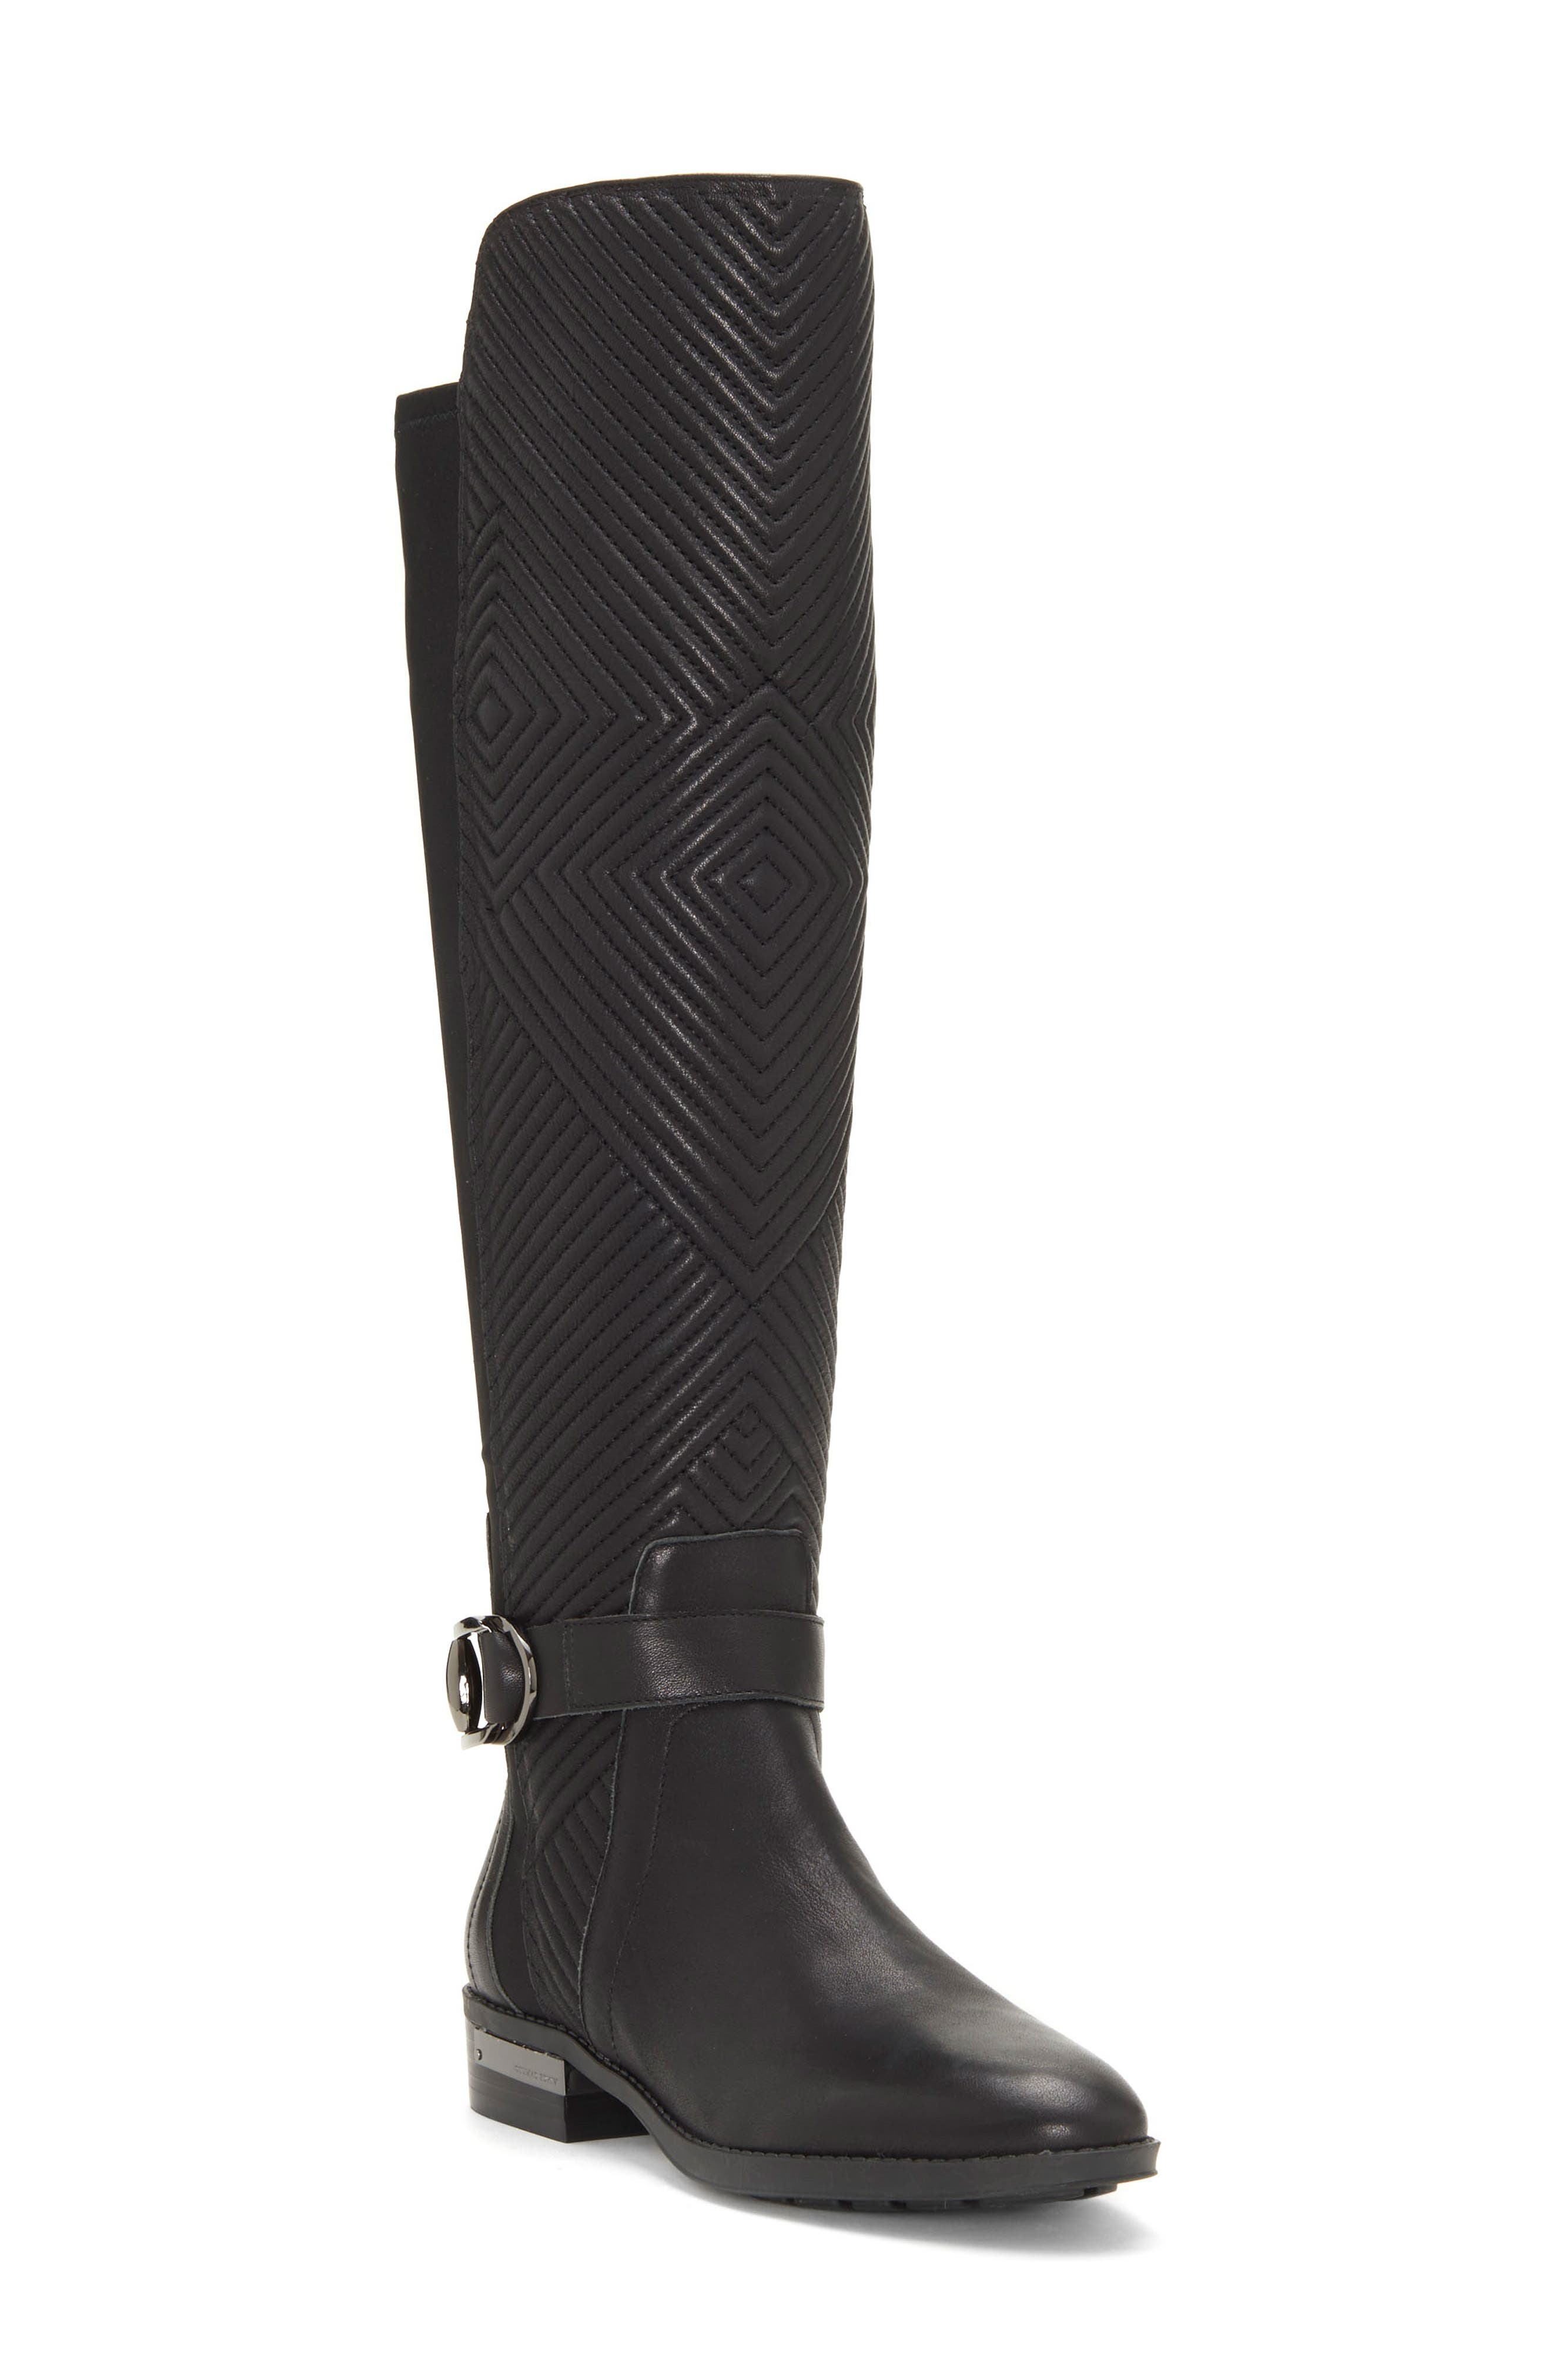 UPC 190662937759 product image for Women's Vince Camuto Pordalia Over-The-Knee Boot, Size 8.5 M - Black | upcitemdb.com